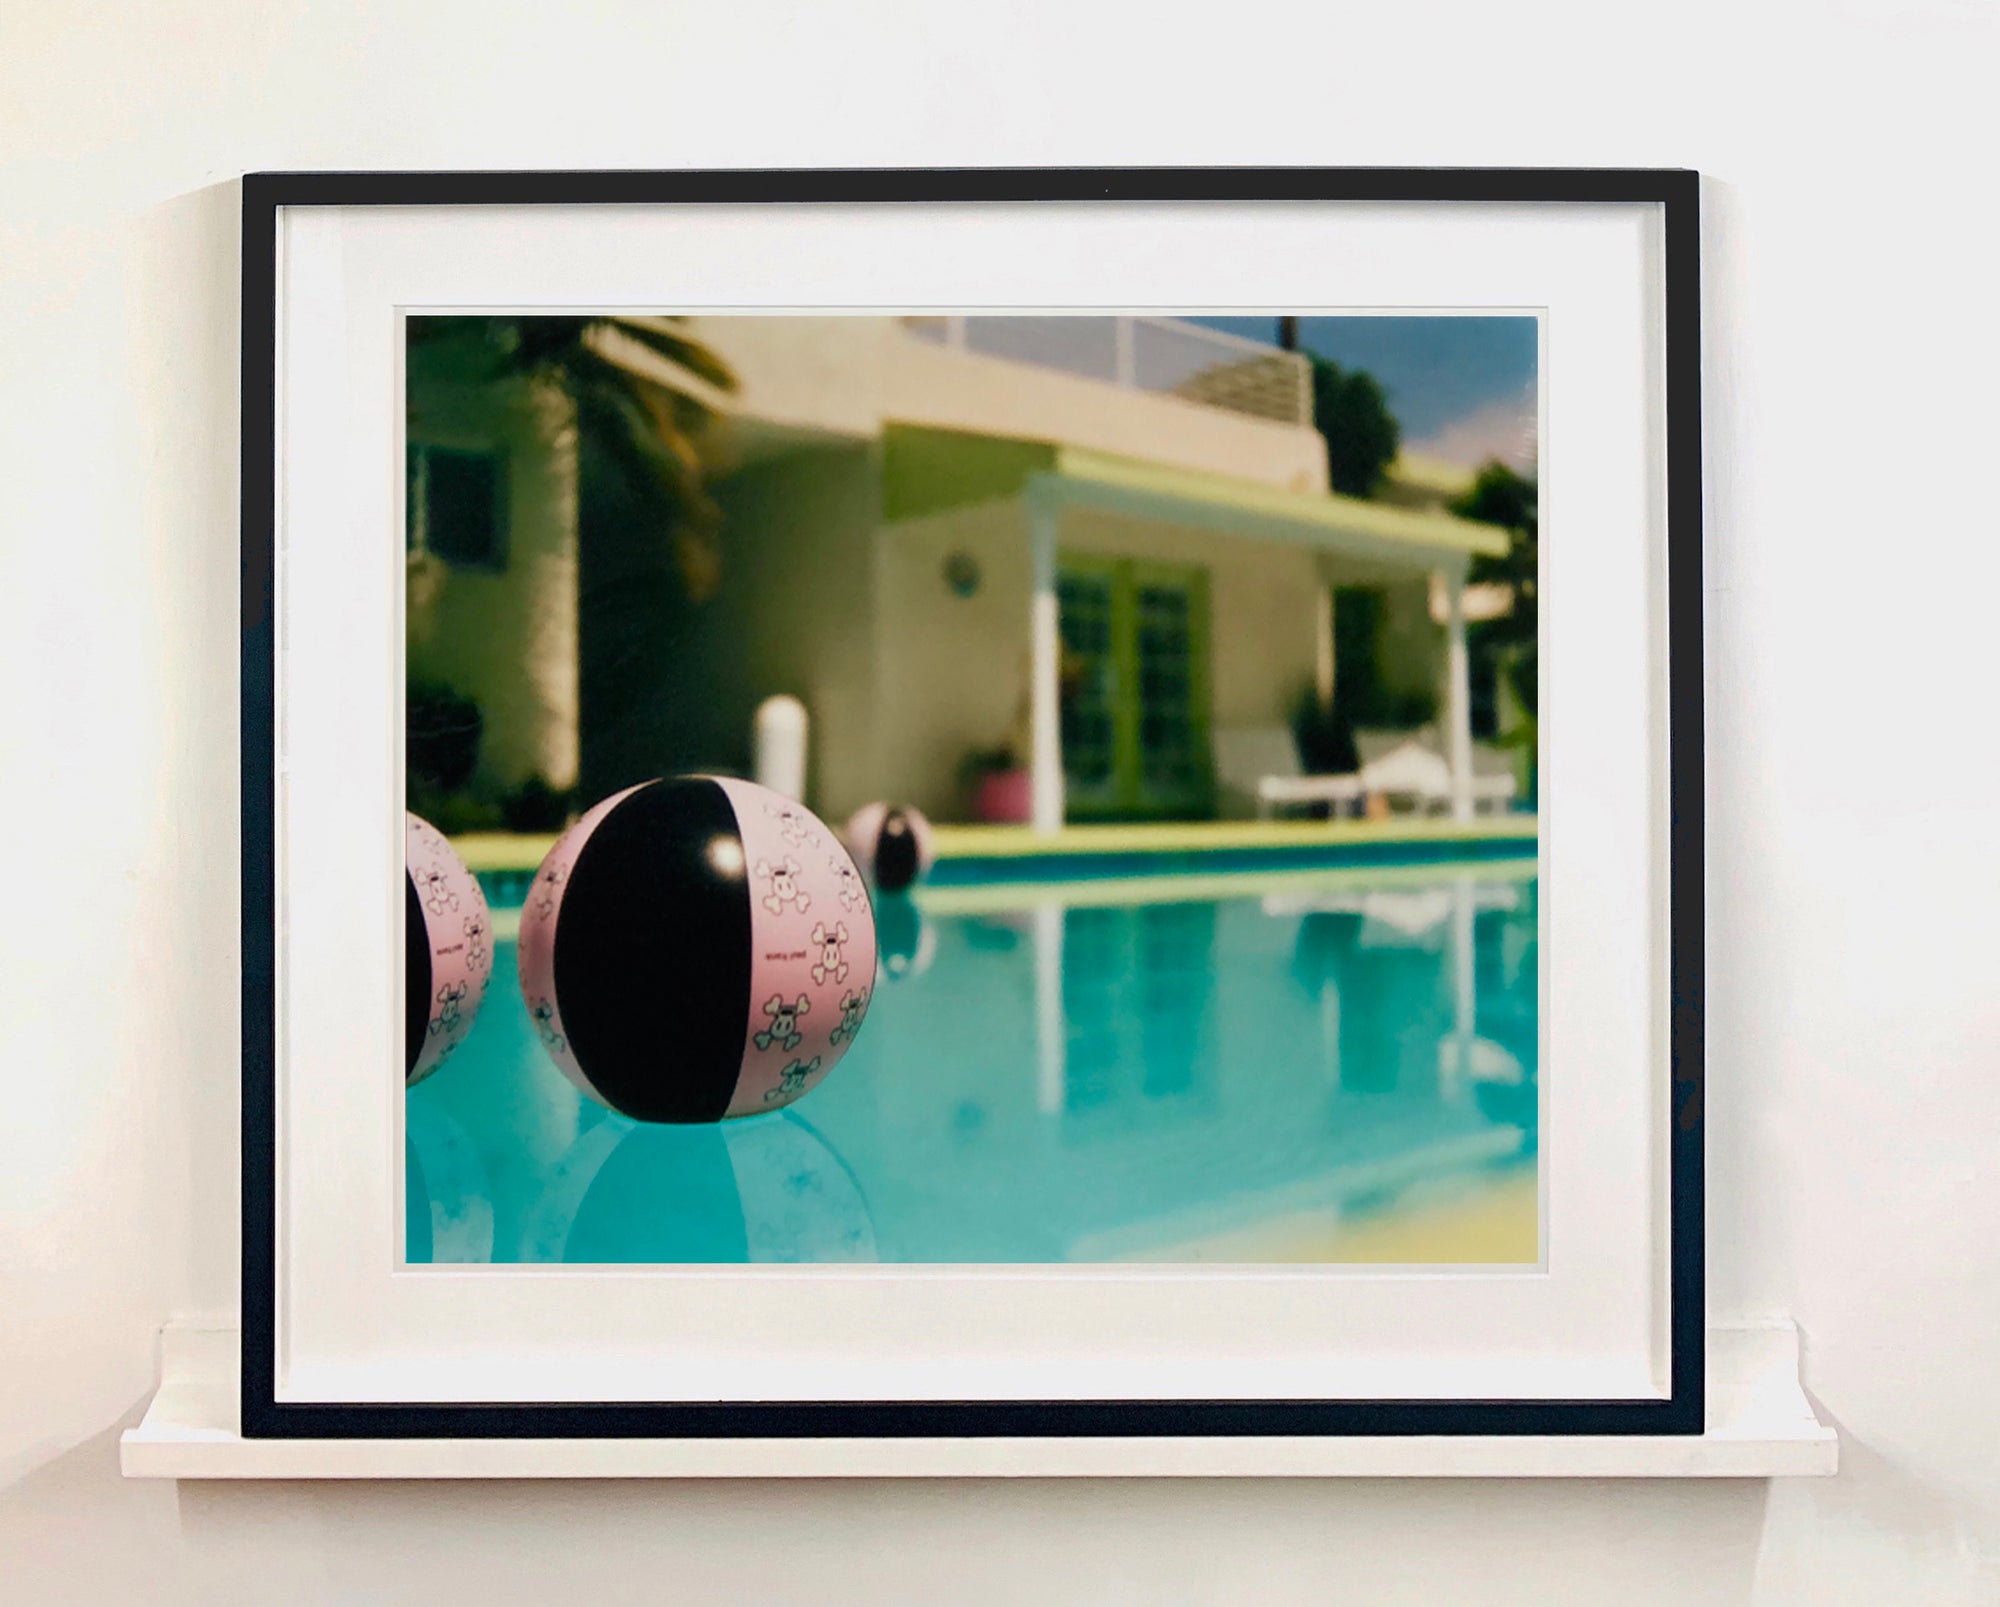 Part of Richard Heeps' 'Dream in Colour' Series, 'Beach Ball' captures Palm Springs mid-century modern architecture behind a trio of pink and black beach balls. The stillness and the subtle colours combine to make a calming artwork with a seductive cinematic vibe.